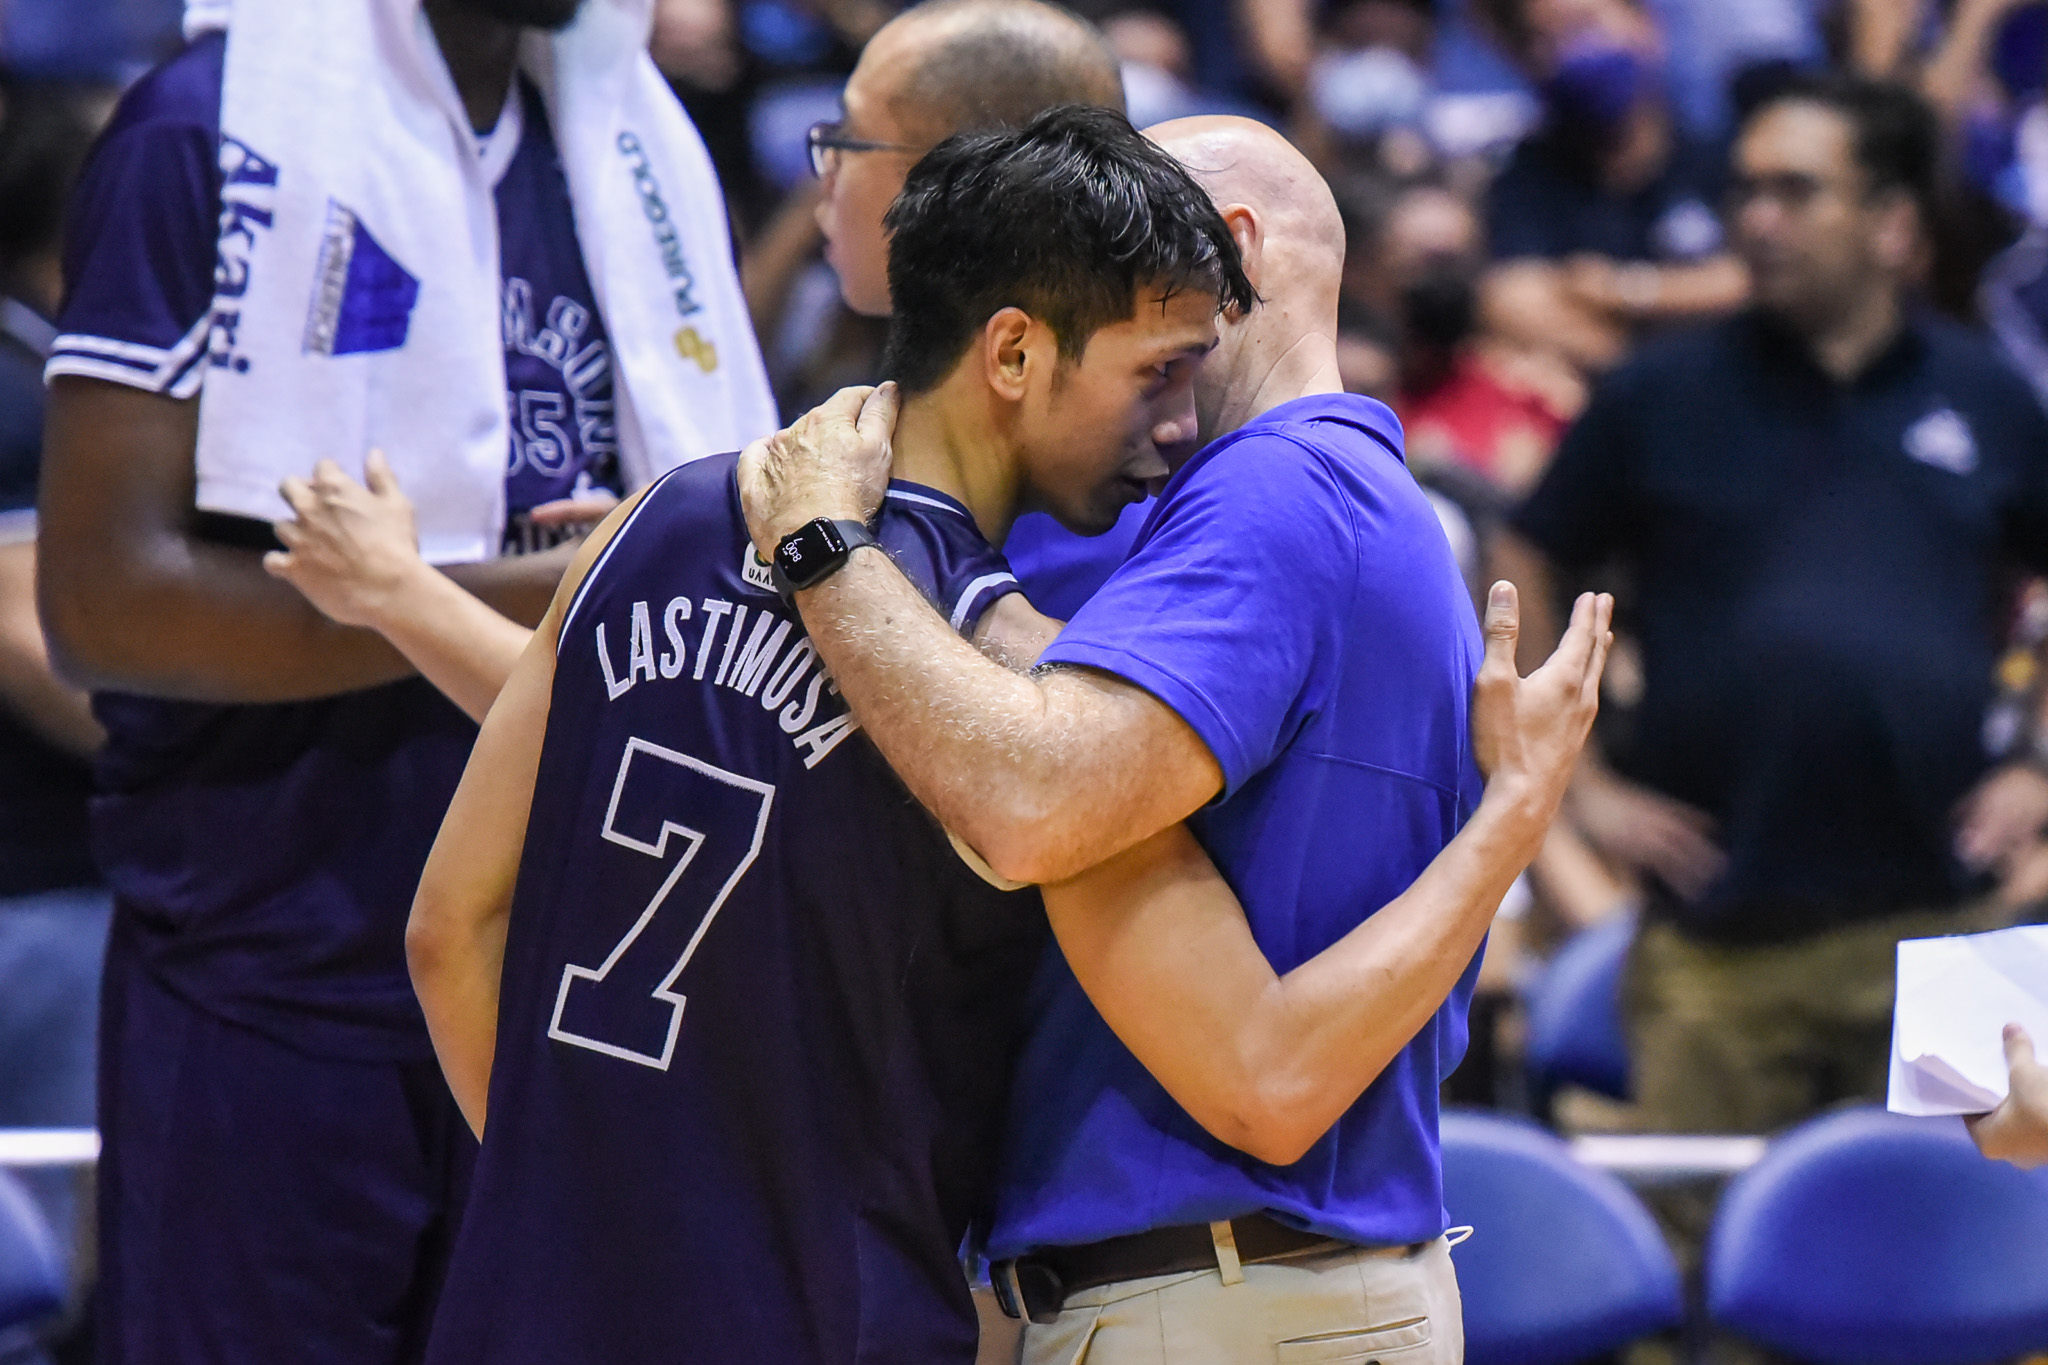 Adamson star Jerom Lastimosa and Ateneo coach Tab Baldwin hug it out after their Final Four match up. –UAAP PHOTO